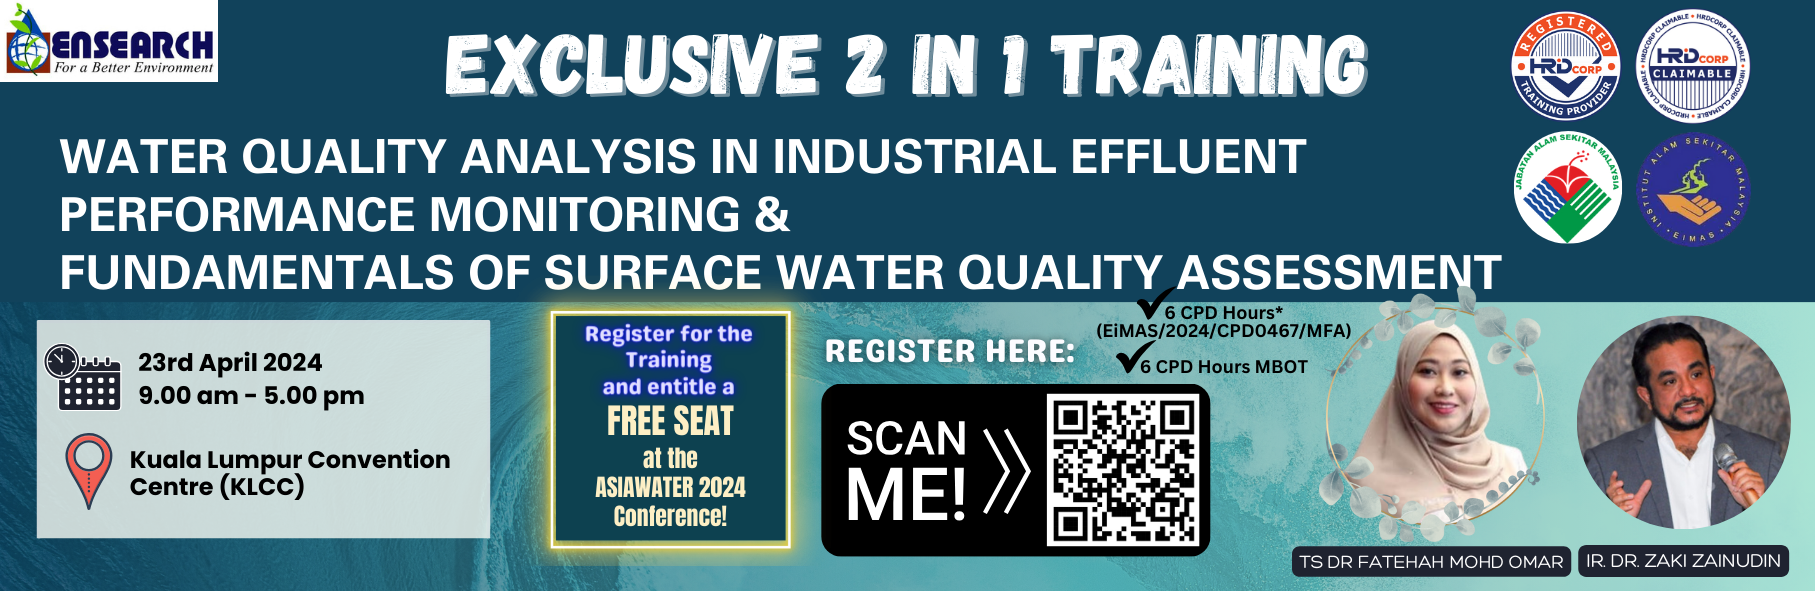 2IN1 TRAINING ASIAWATER 2024 BANNER  (2)